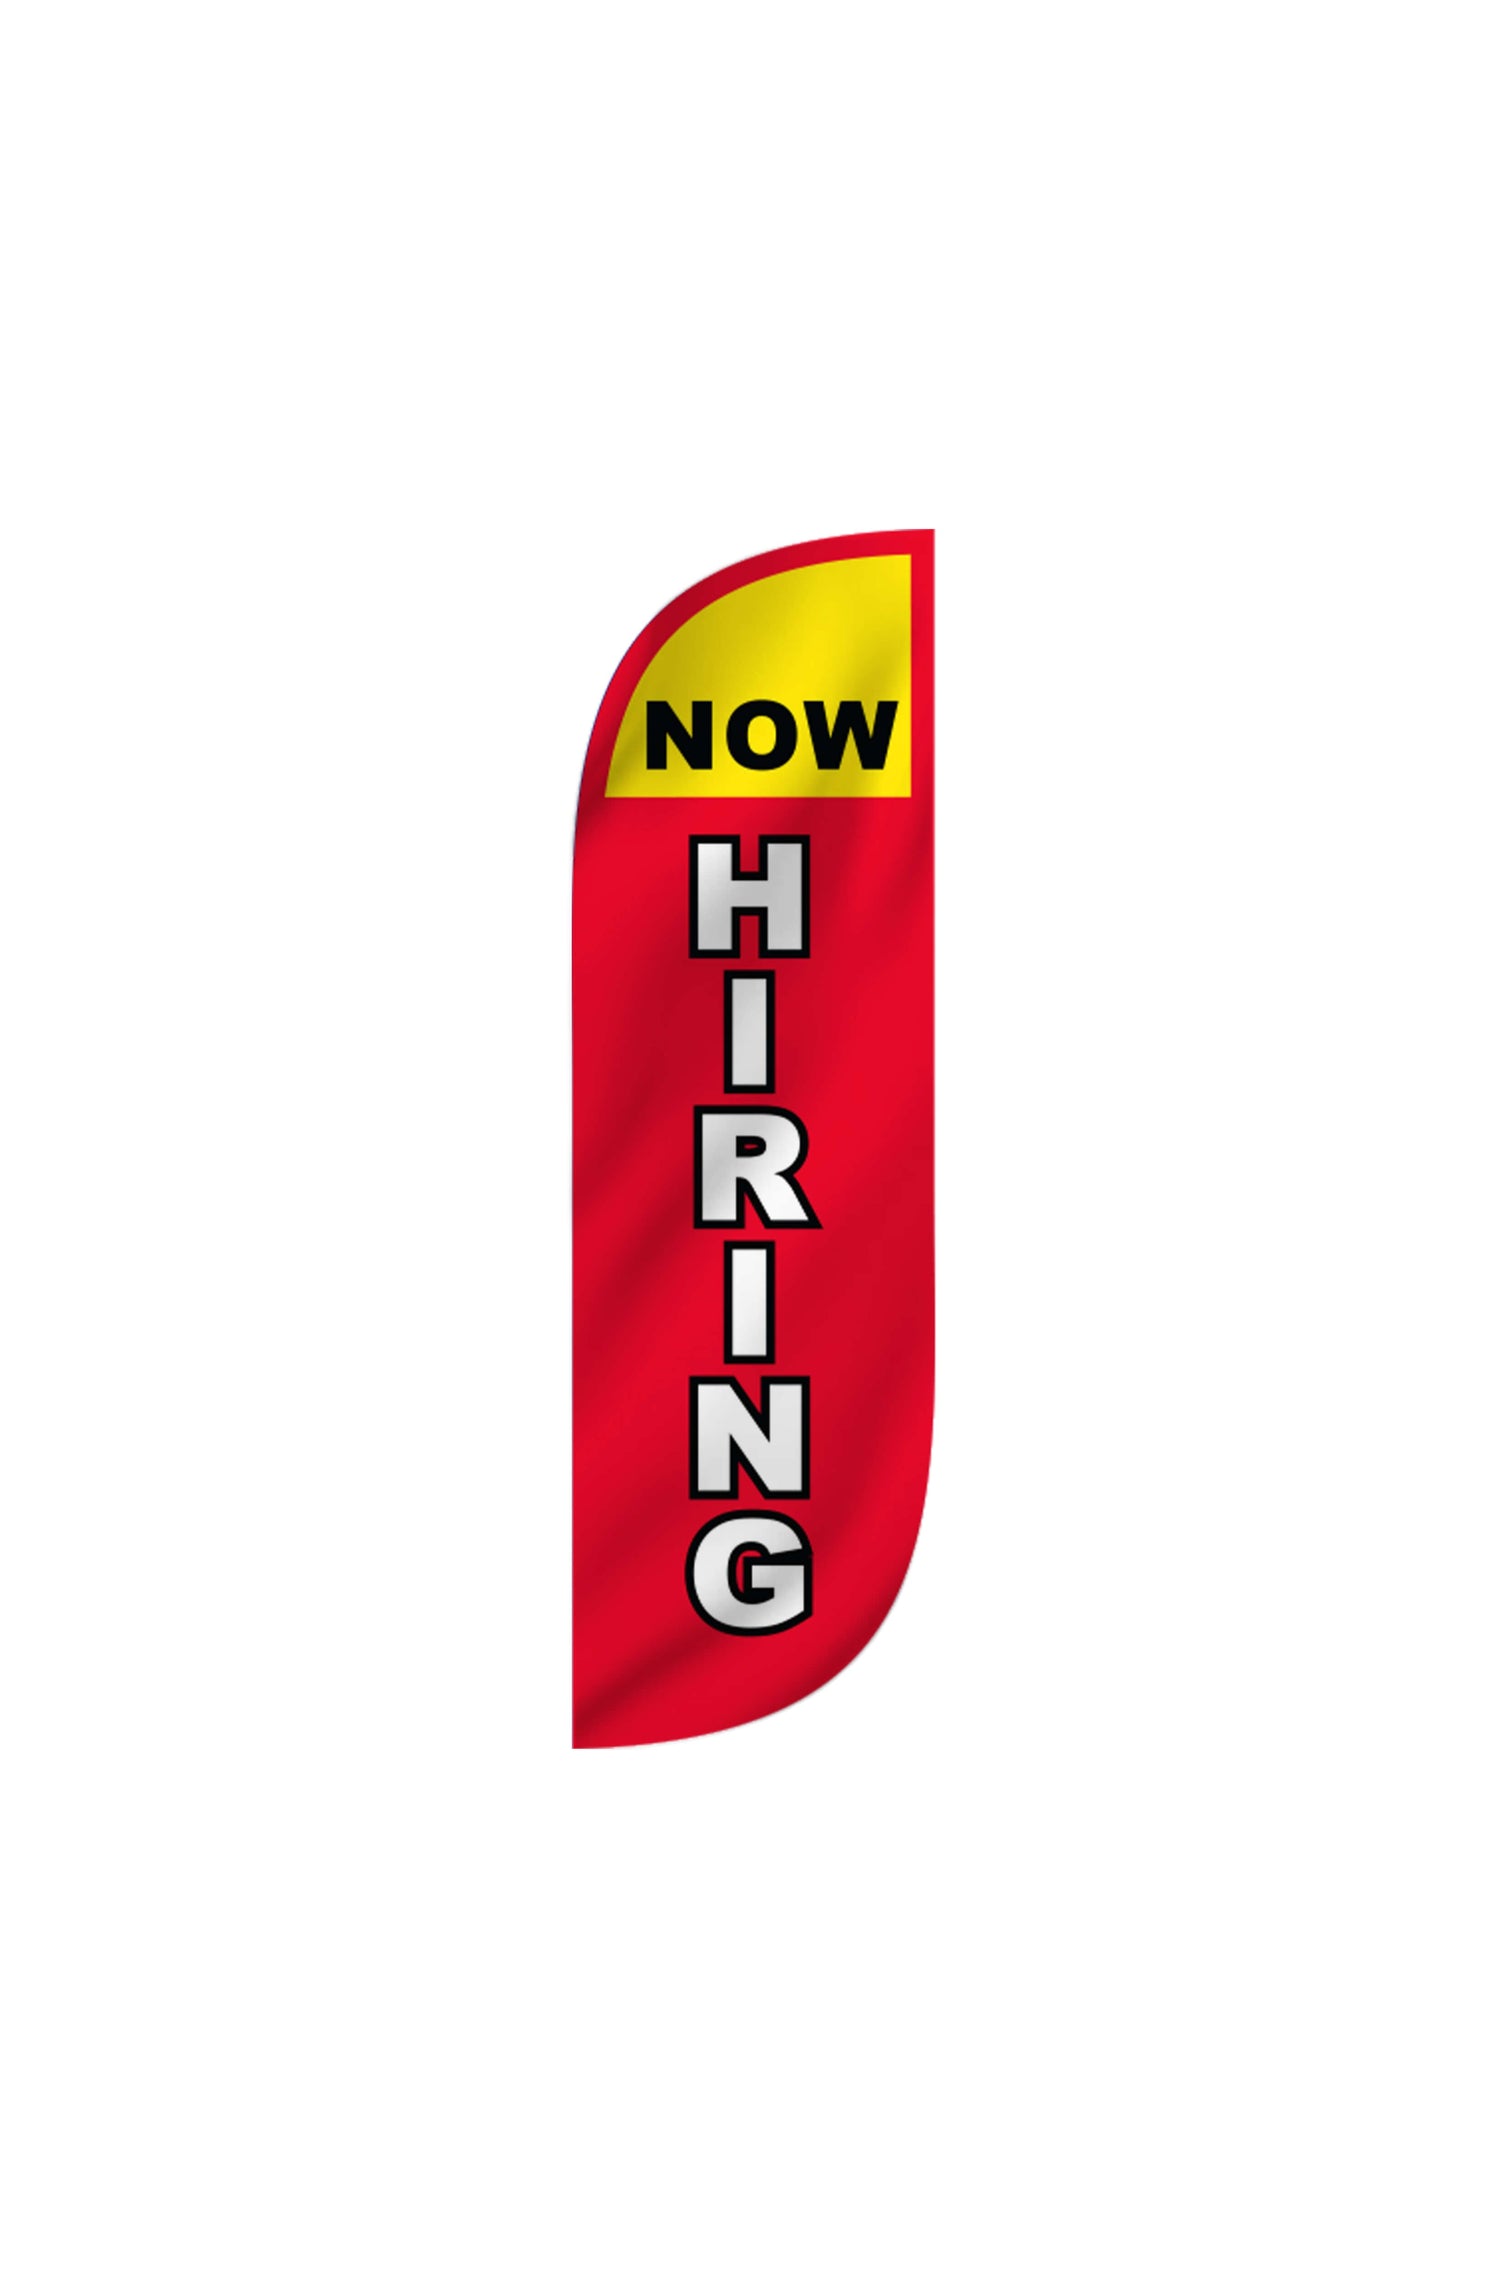 Now Hiring Feather Flag 10M5000136